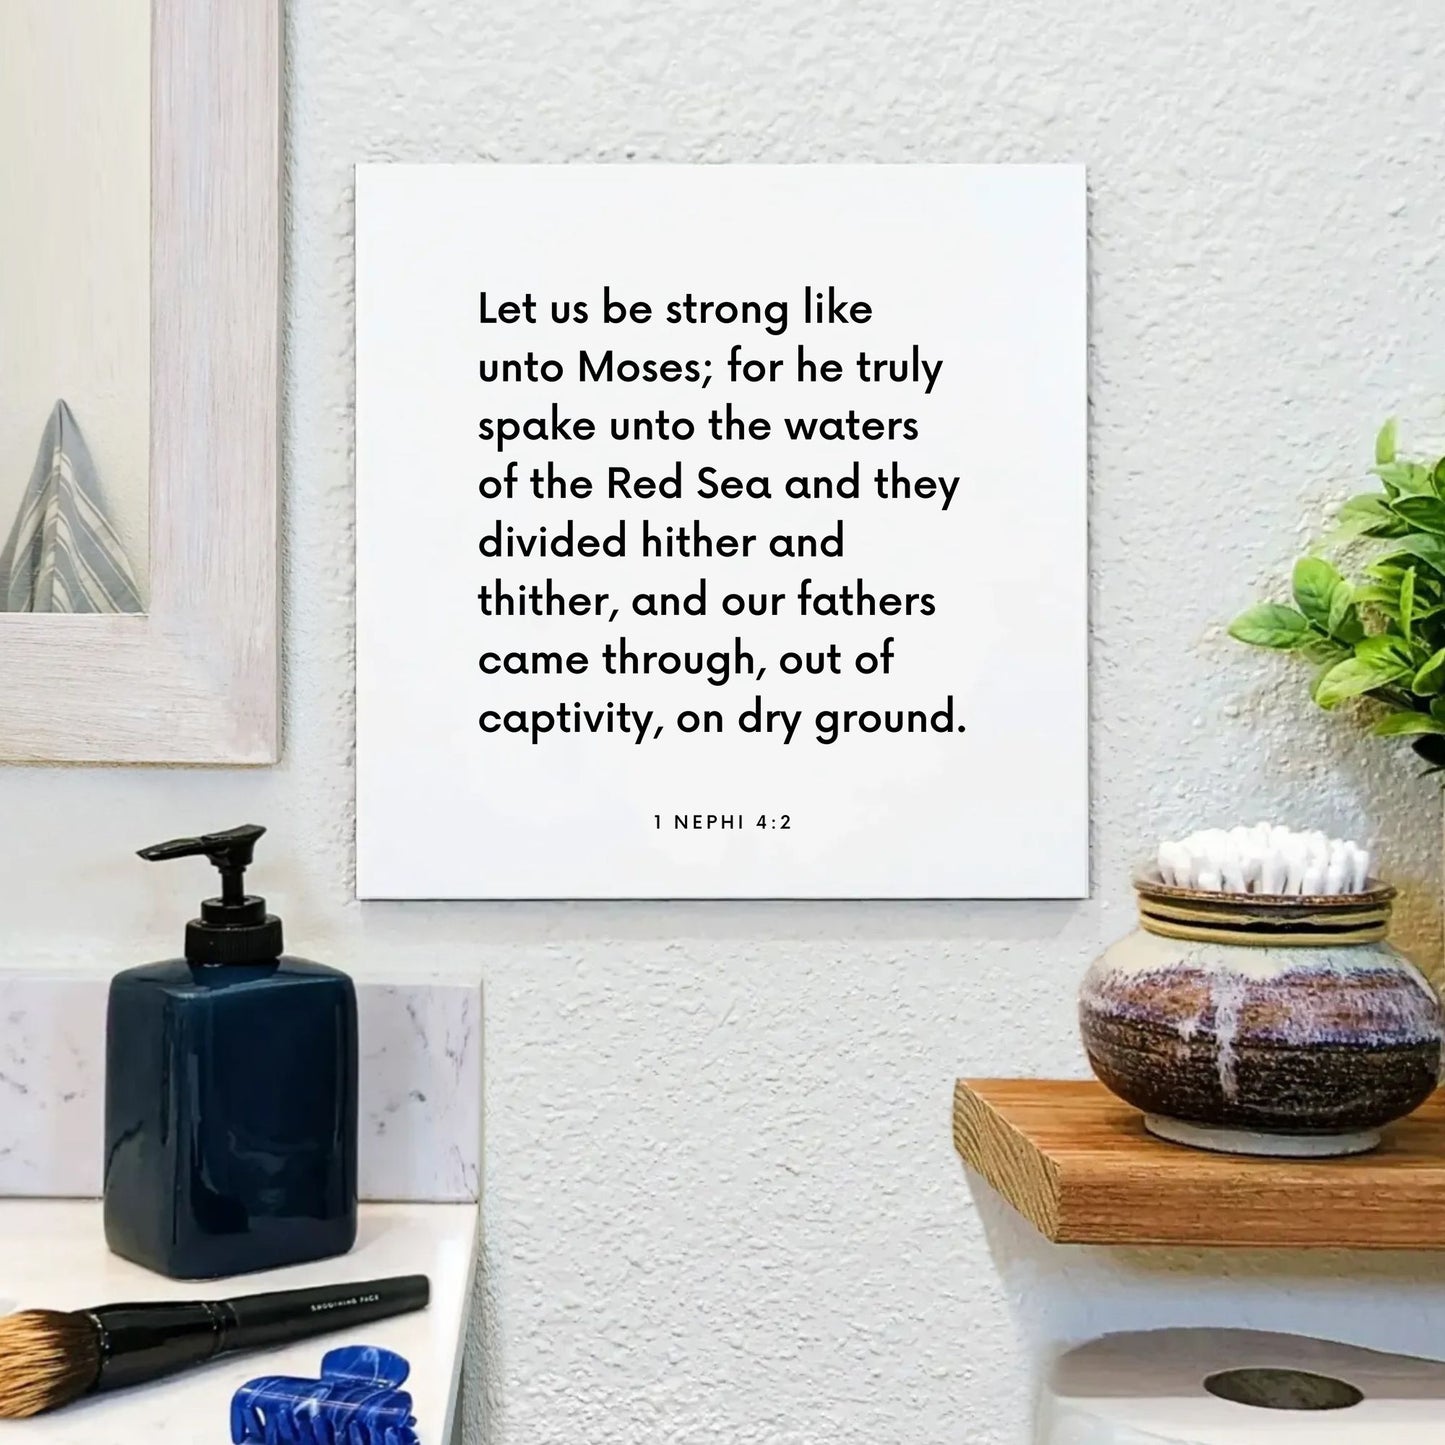 Bathroom mouting of the scripture tile for 1 Nephi 4:2 - "Let us be strong like unto Moses"